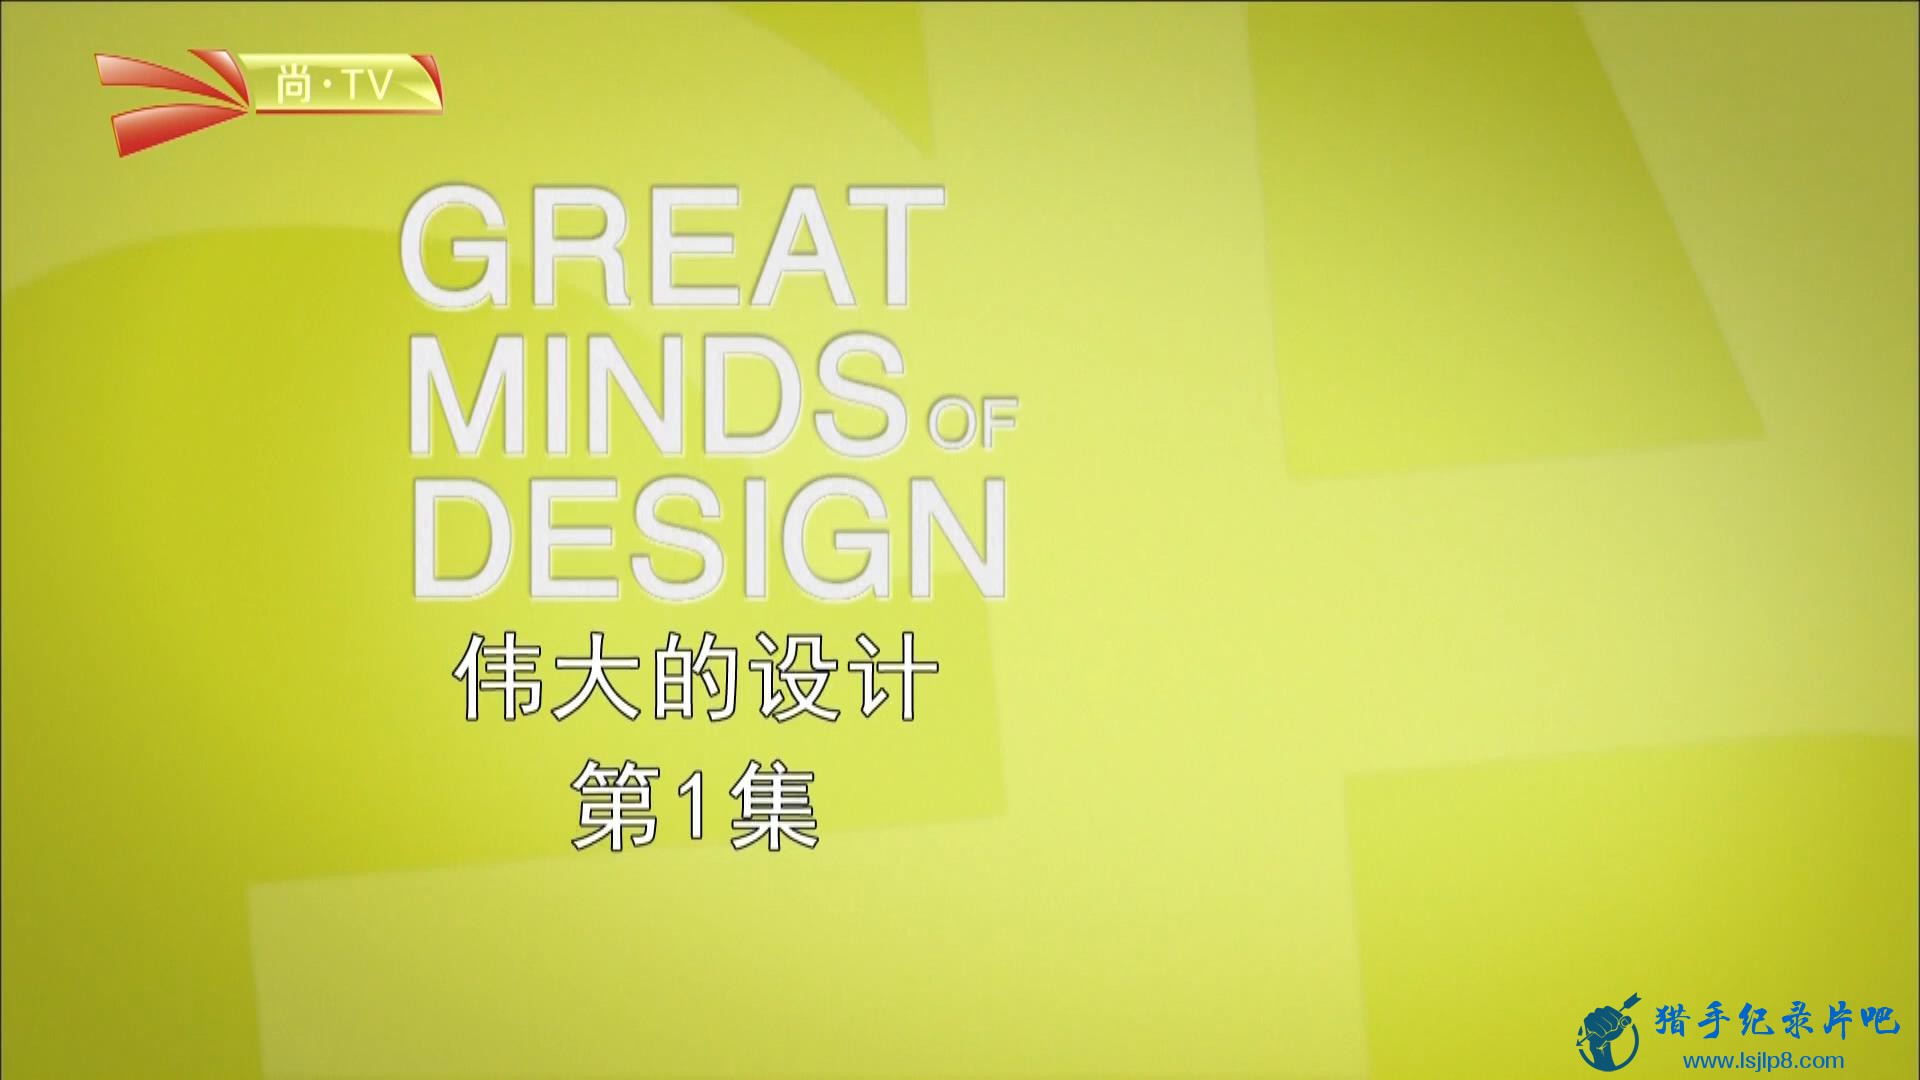 TV.ΰ Great Minds of Design (2012).EP0`1.̫ܲʻ沣 Solar Stained .jpg